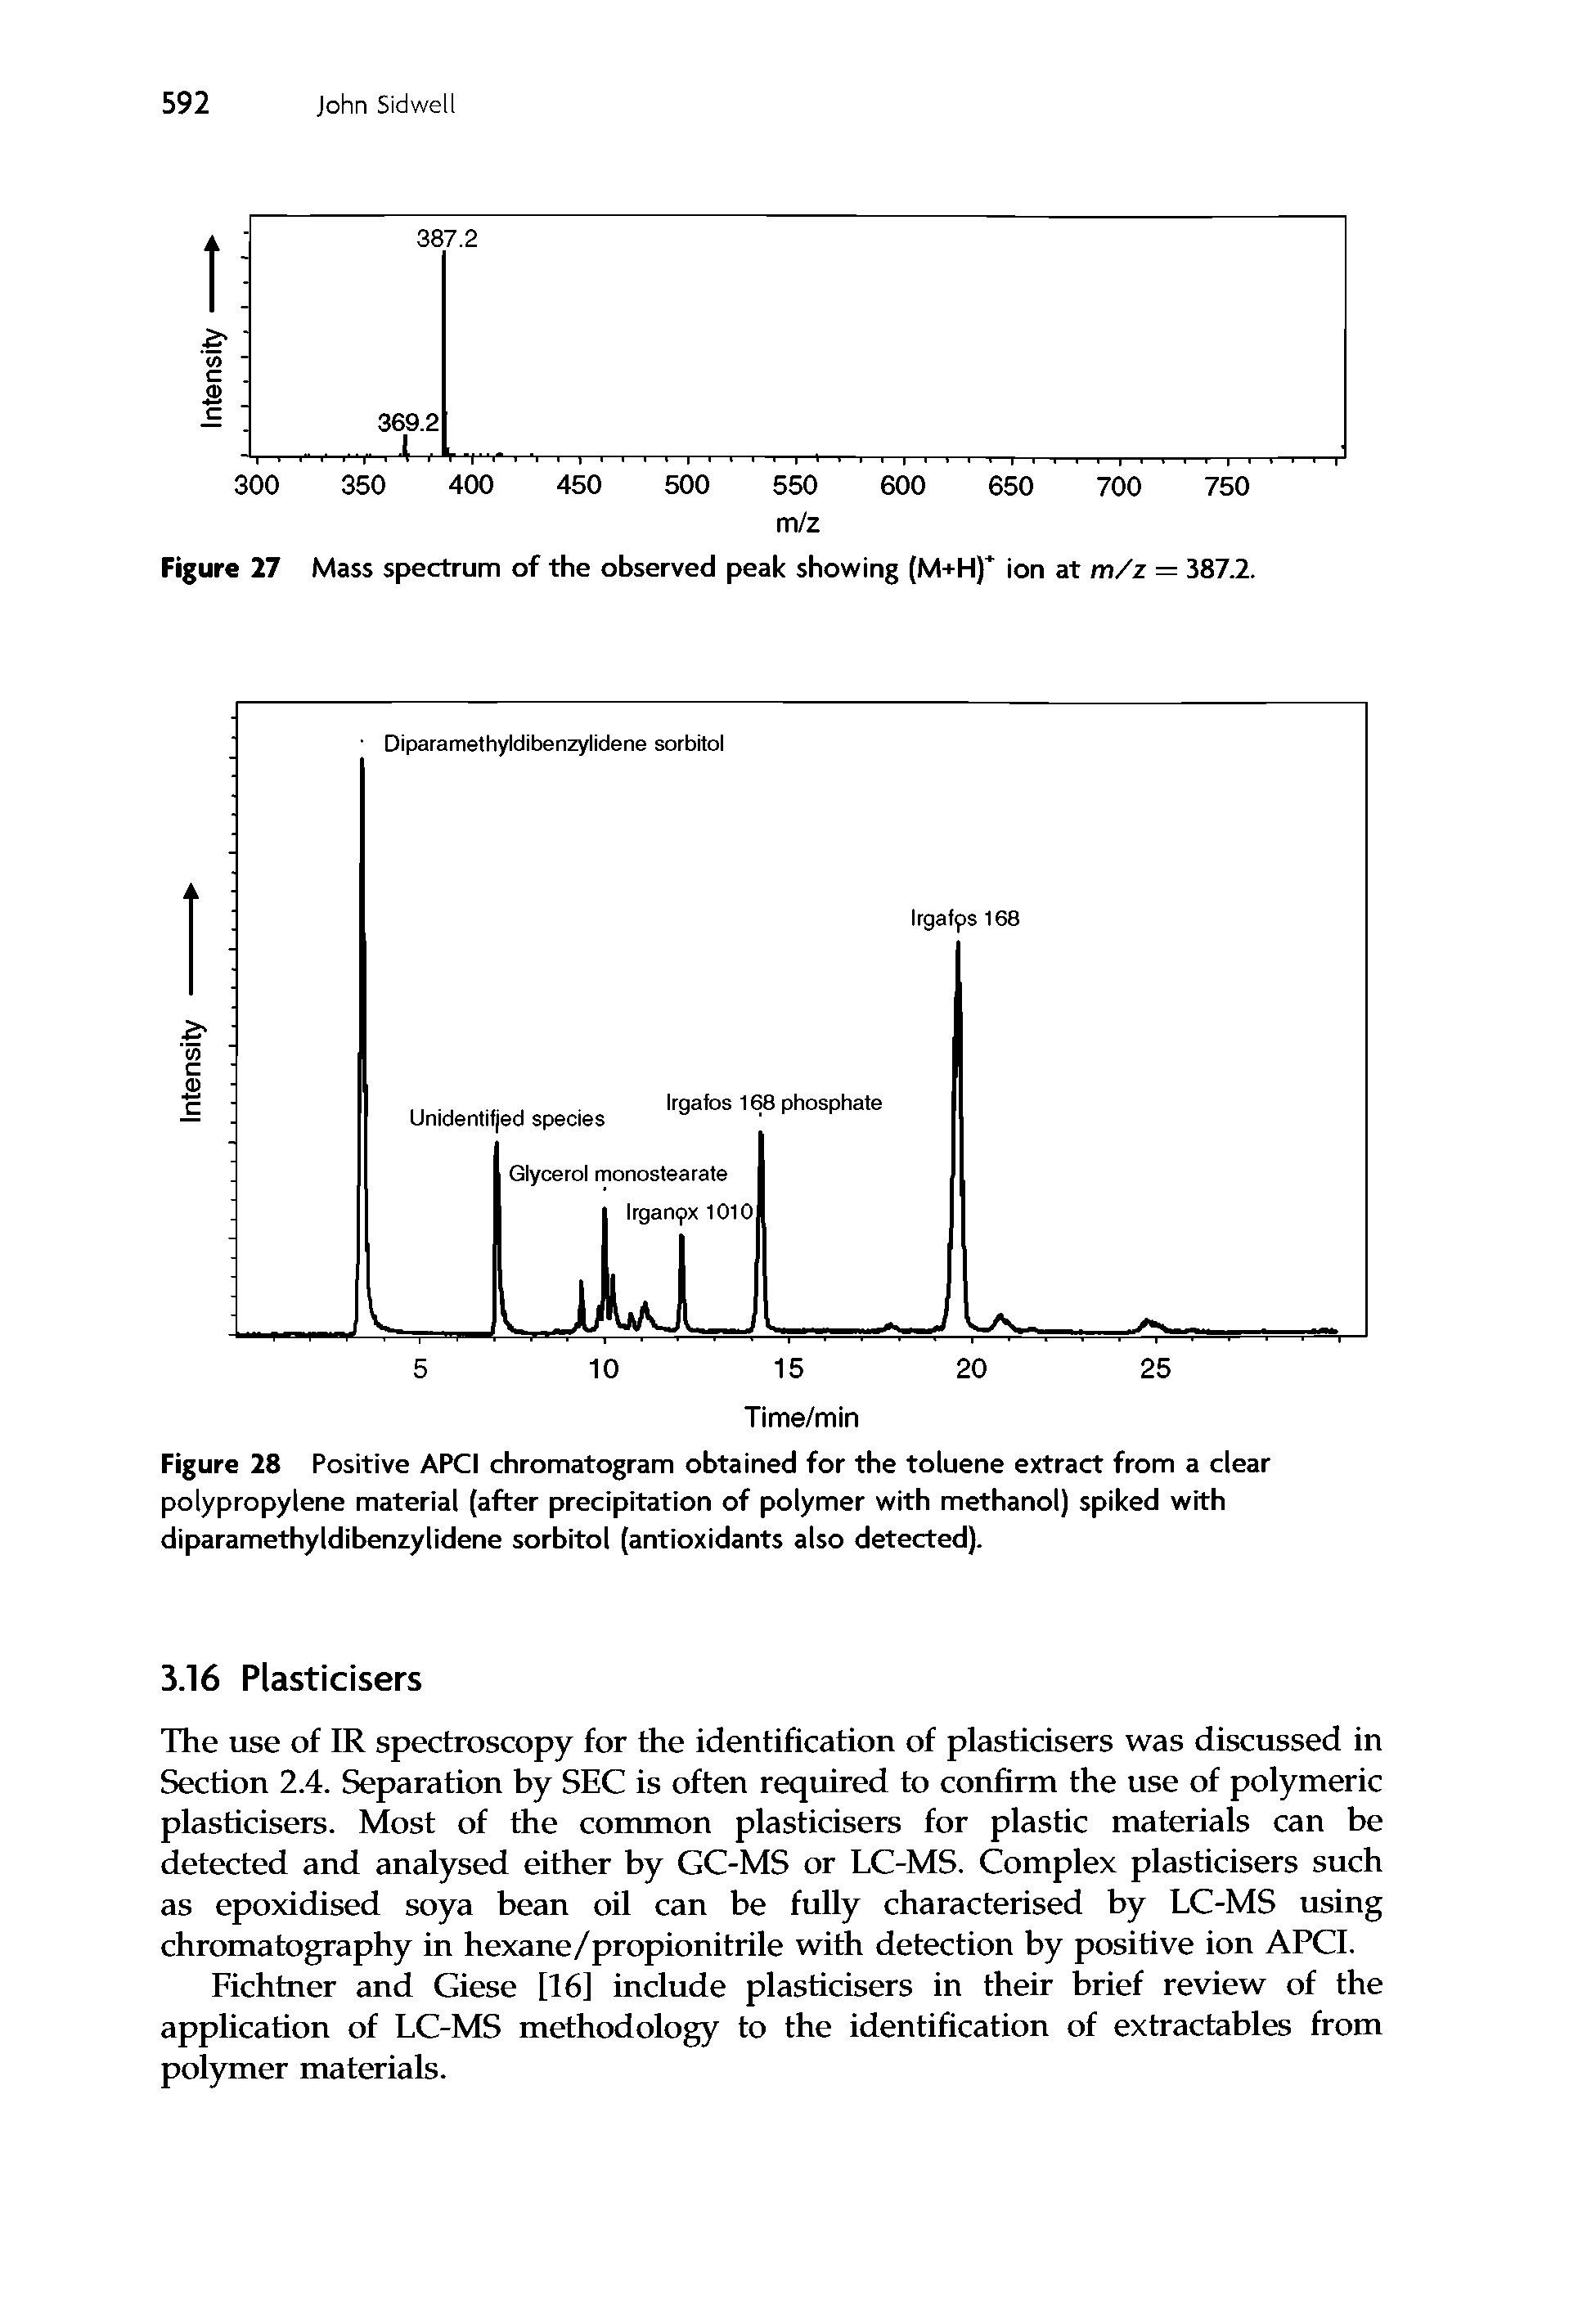 Figure 28 Positive APCI chromatogram obtained for the toluene extract from a clear polypropylene material (after precipitation of polymer with methanol) spiked with diparamethyldibenzylidene sorbitol (antioxidants also detected).